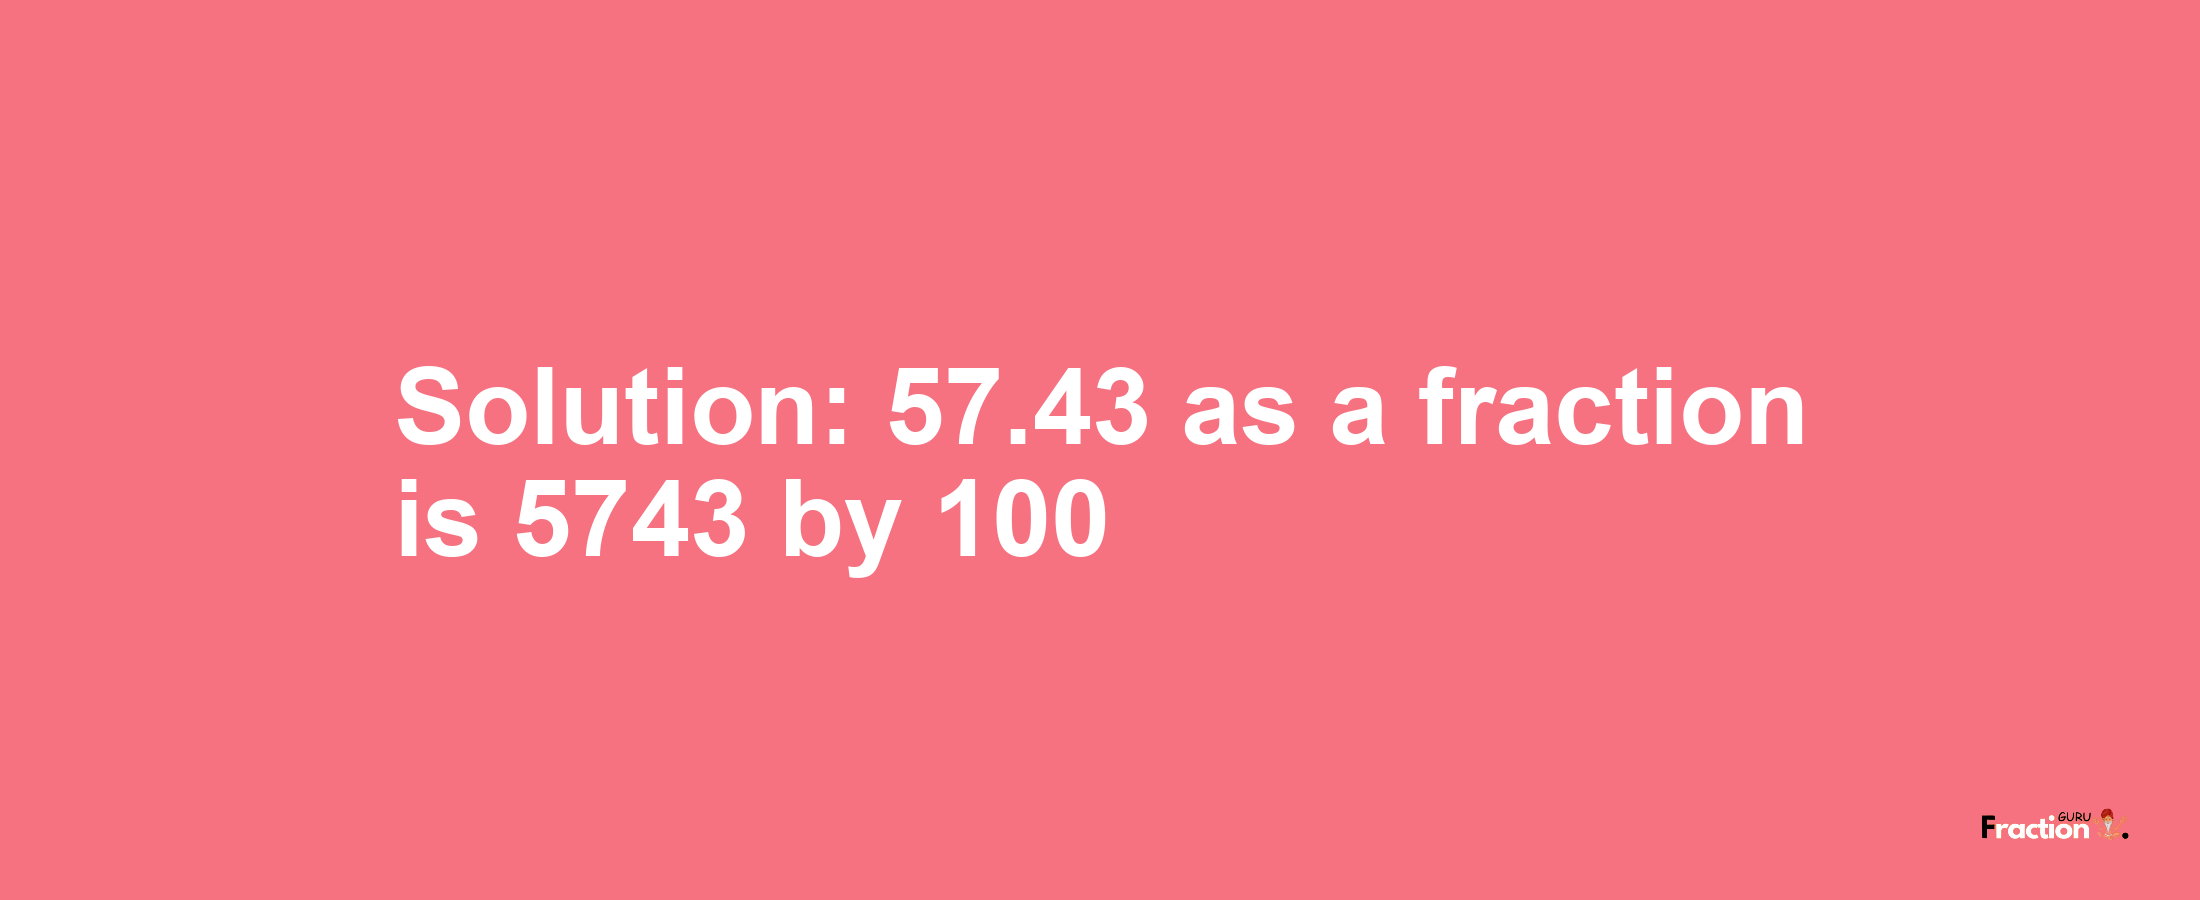 Solution:57.43 as a fraction is 5743/100